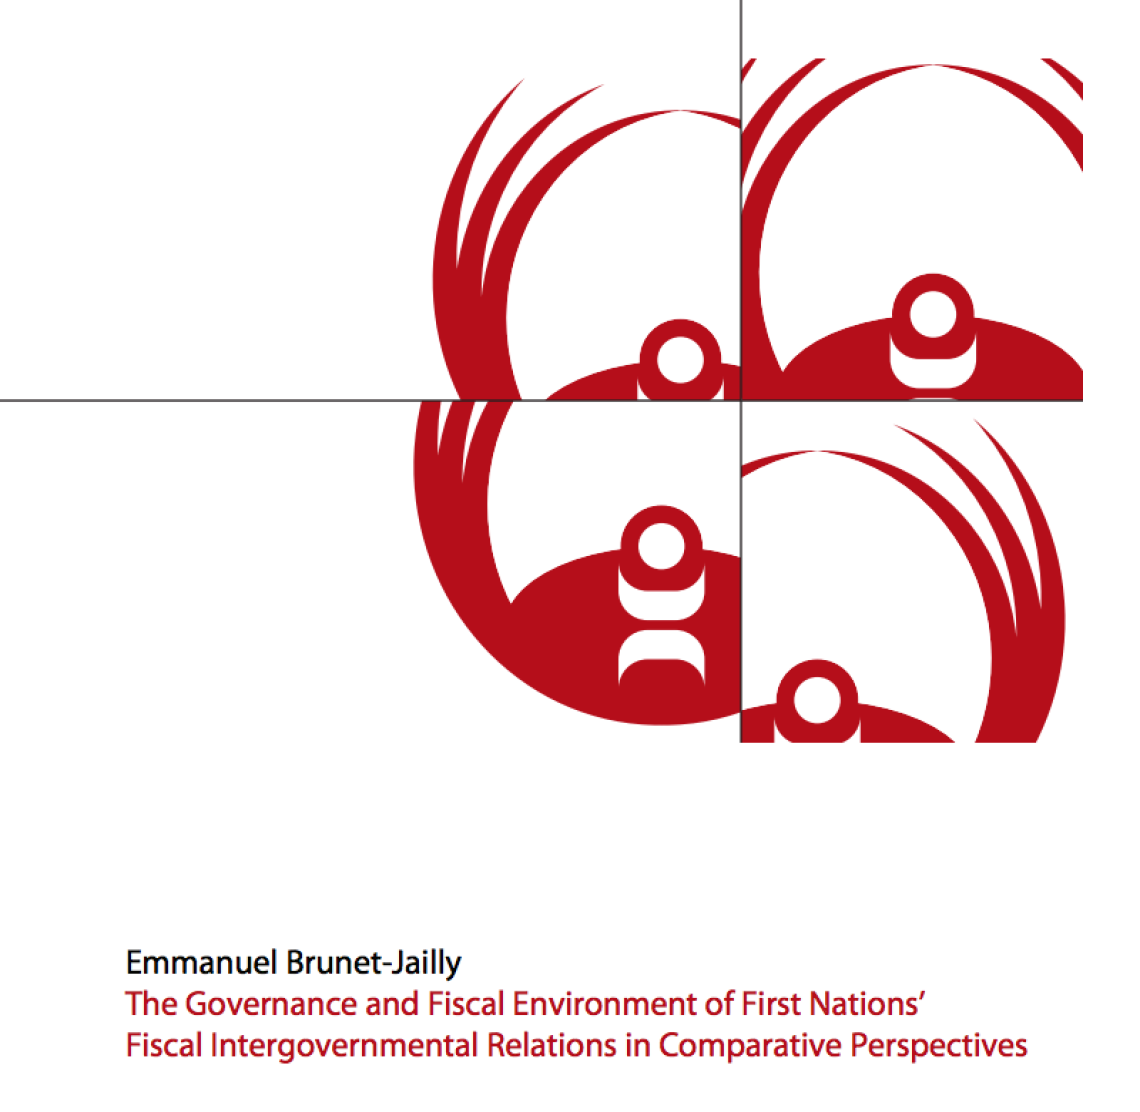 The Governance and Fiscal Environment of First Nationsâ€™ Fiscal Intergovernmental Relations in Comparative Perspectives